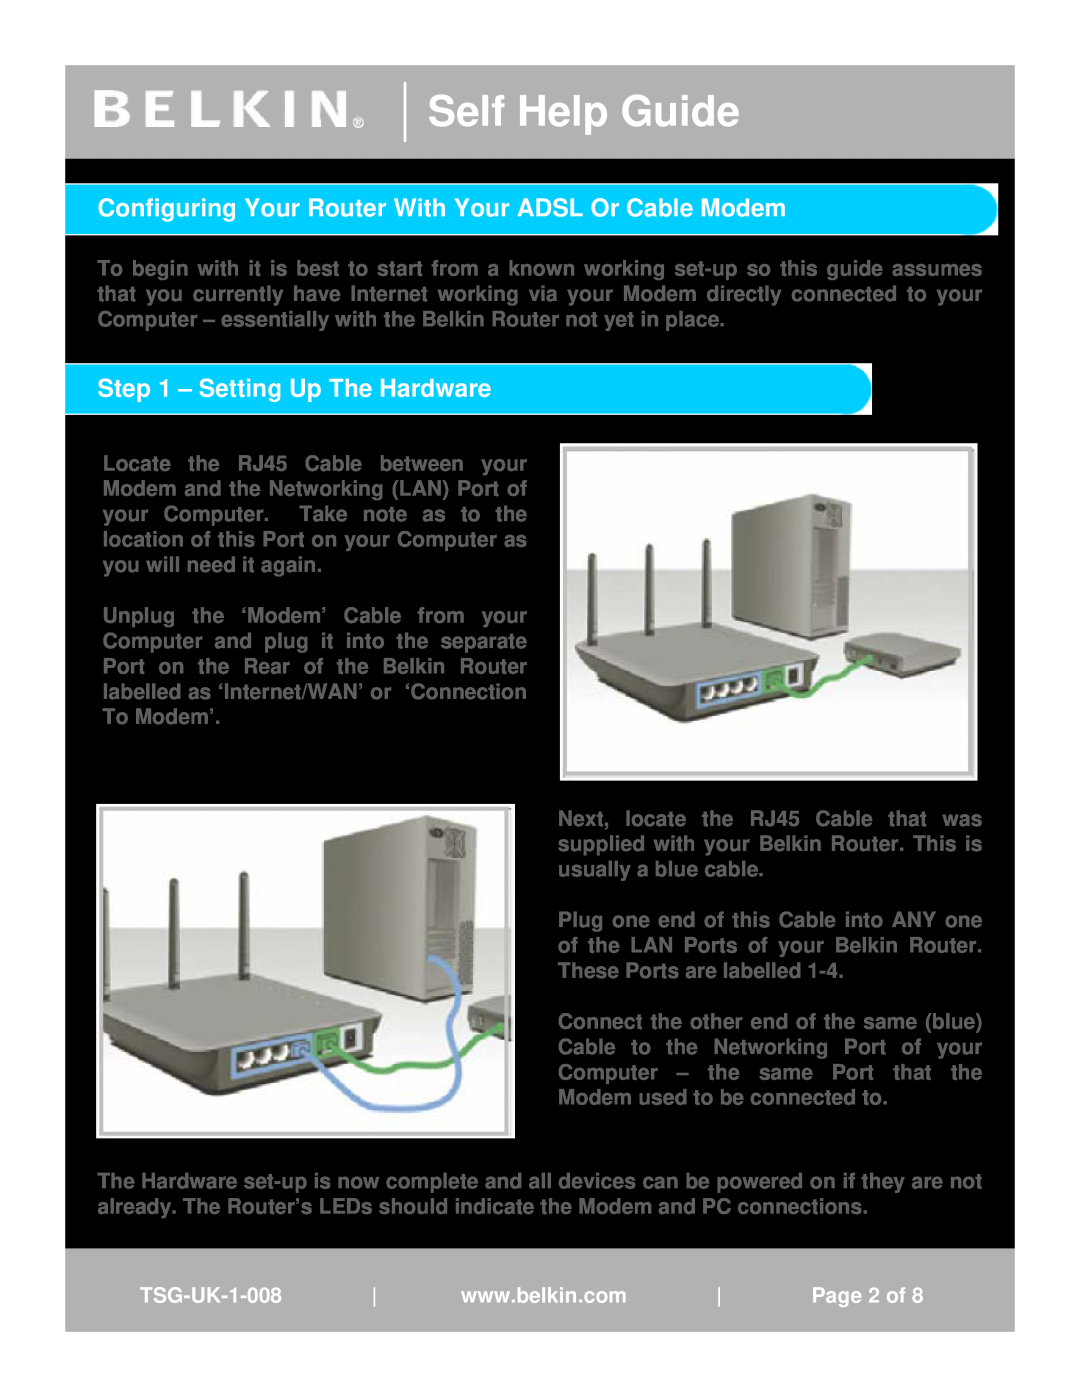 Belkin TSG-UK-1-001 manual Configuring Your Router With Your ADSL Or Cable Modem, Setting Up The Hardware, Self Help Guide 